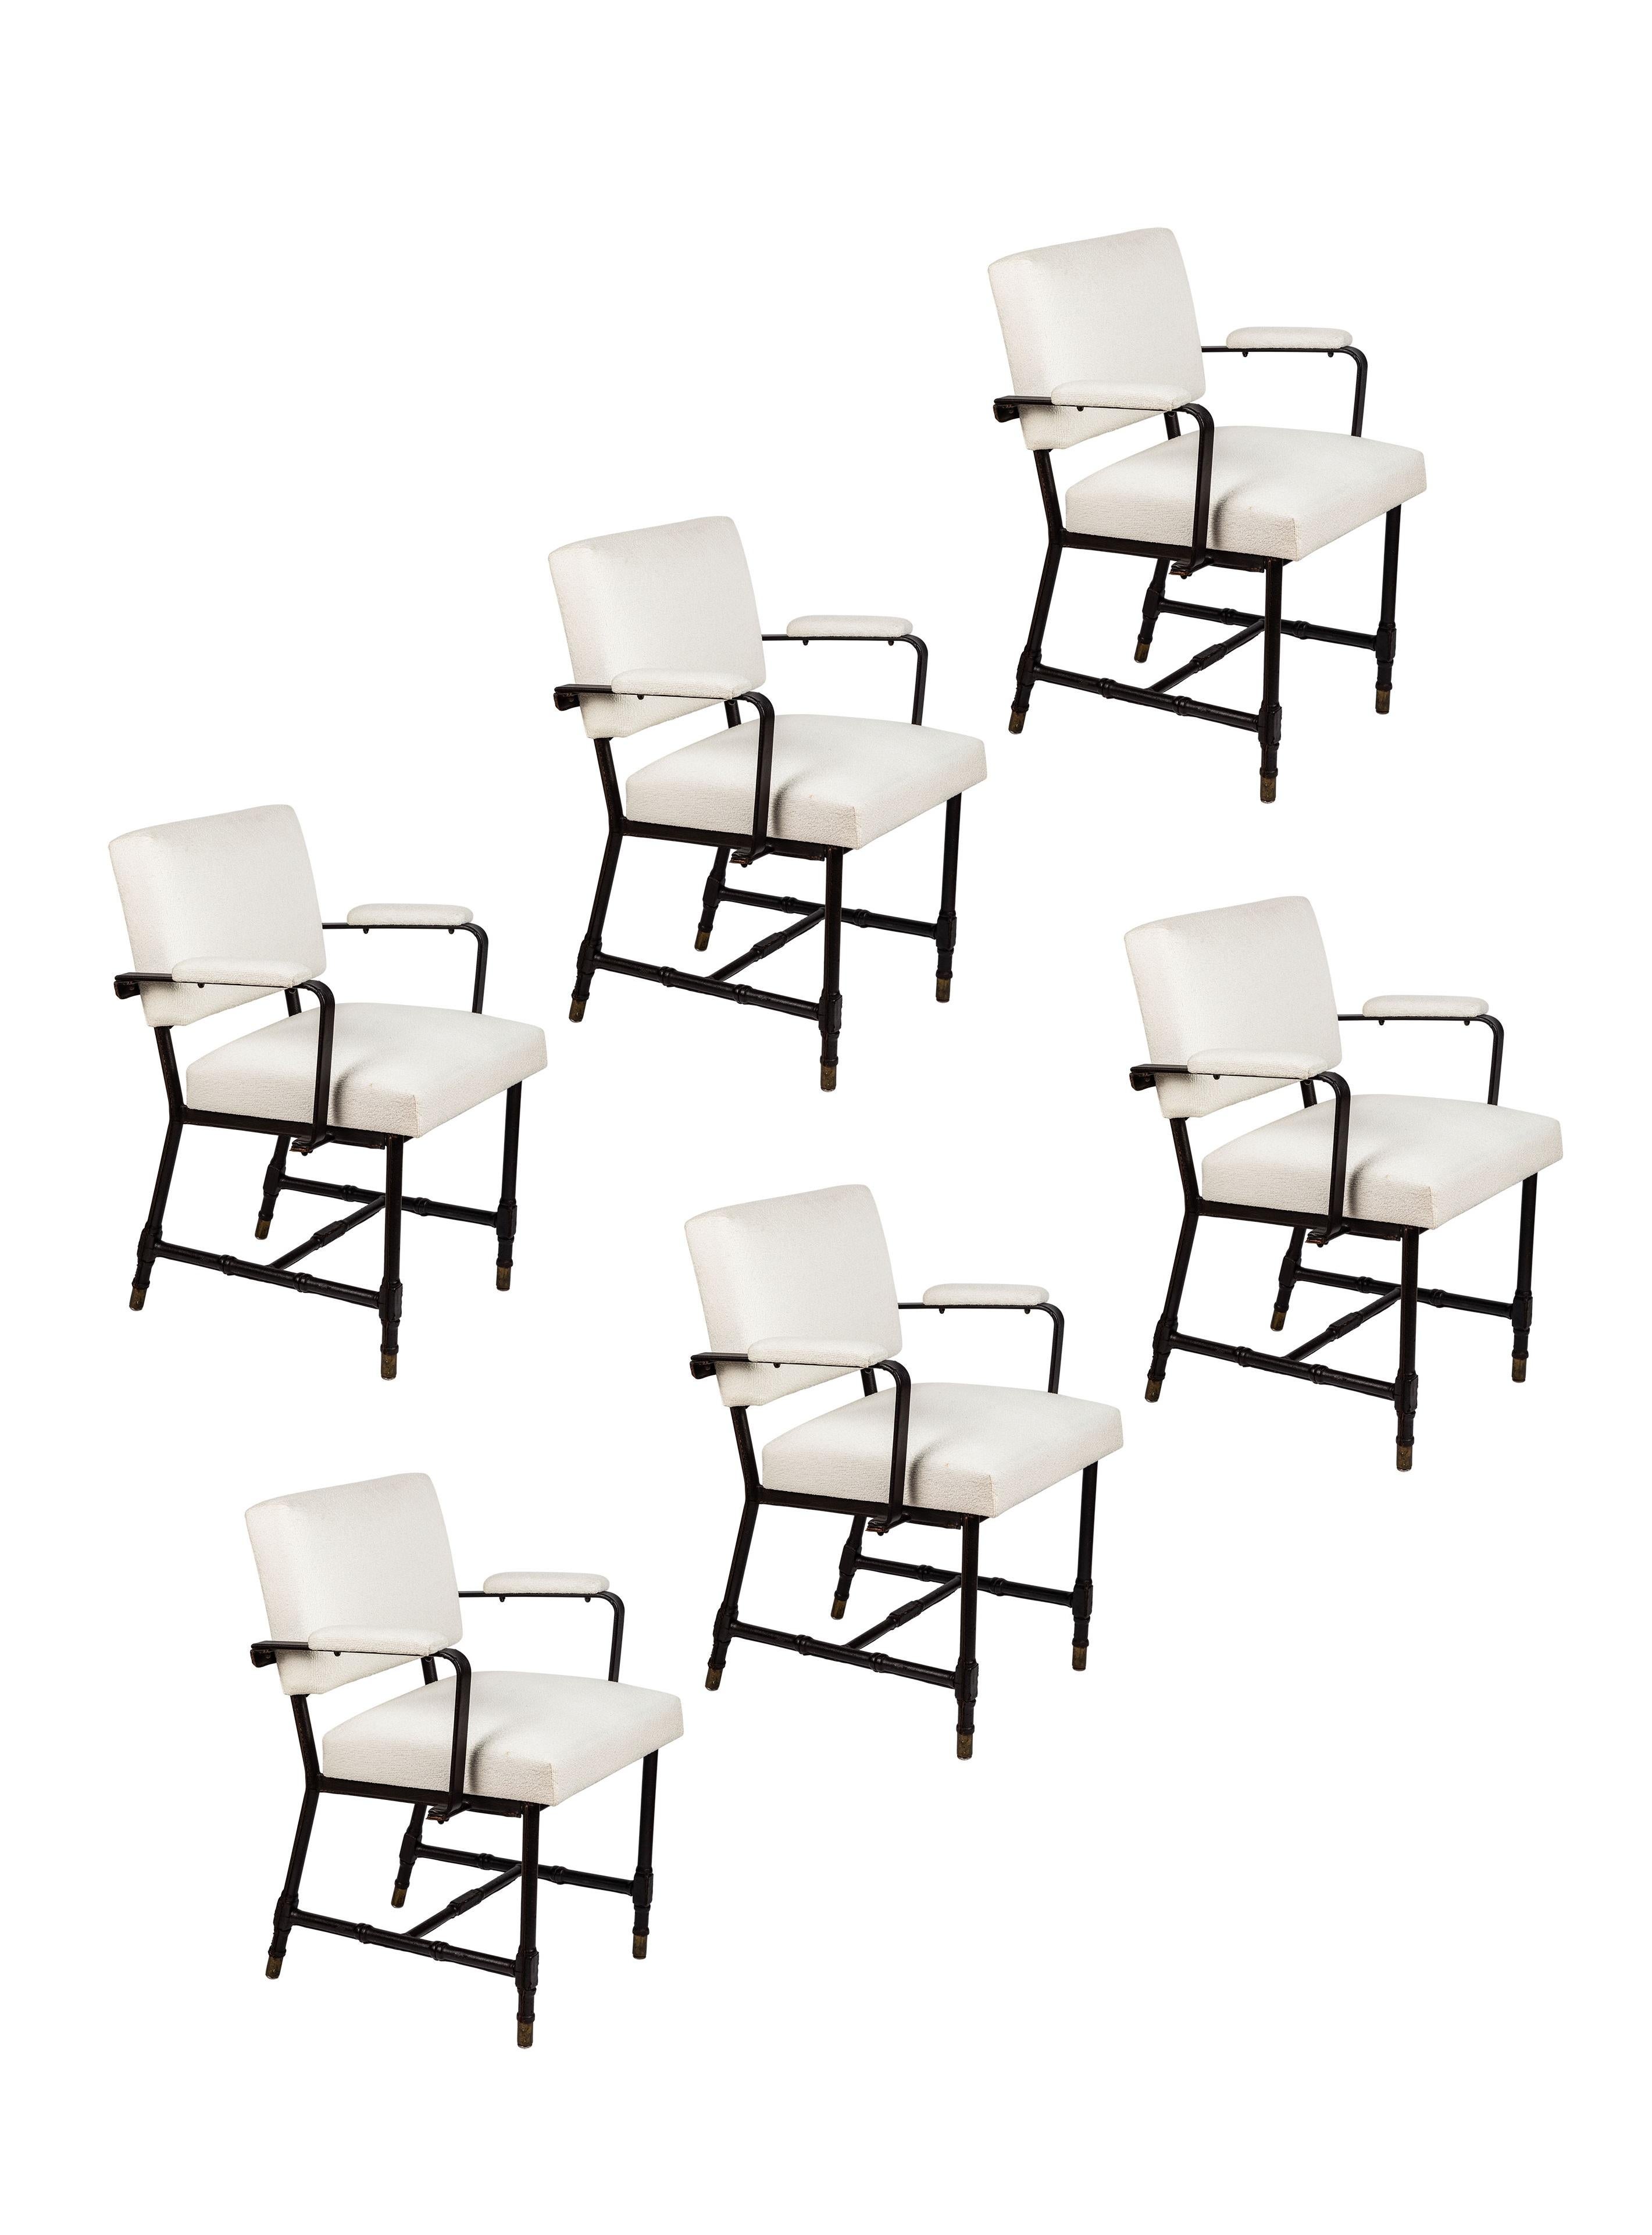 An exceptional set of six (6) armchairs by Jacques Adnet. 

Featuring his signature hand stitched leatherette base with brass sabots, newly upholstered seats, backs and arms in white bouclé, French, 1950s.

Provenance: Michel Contessa, Miami.